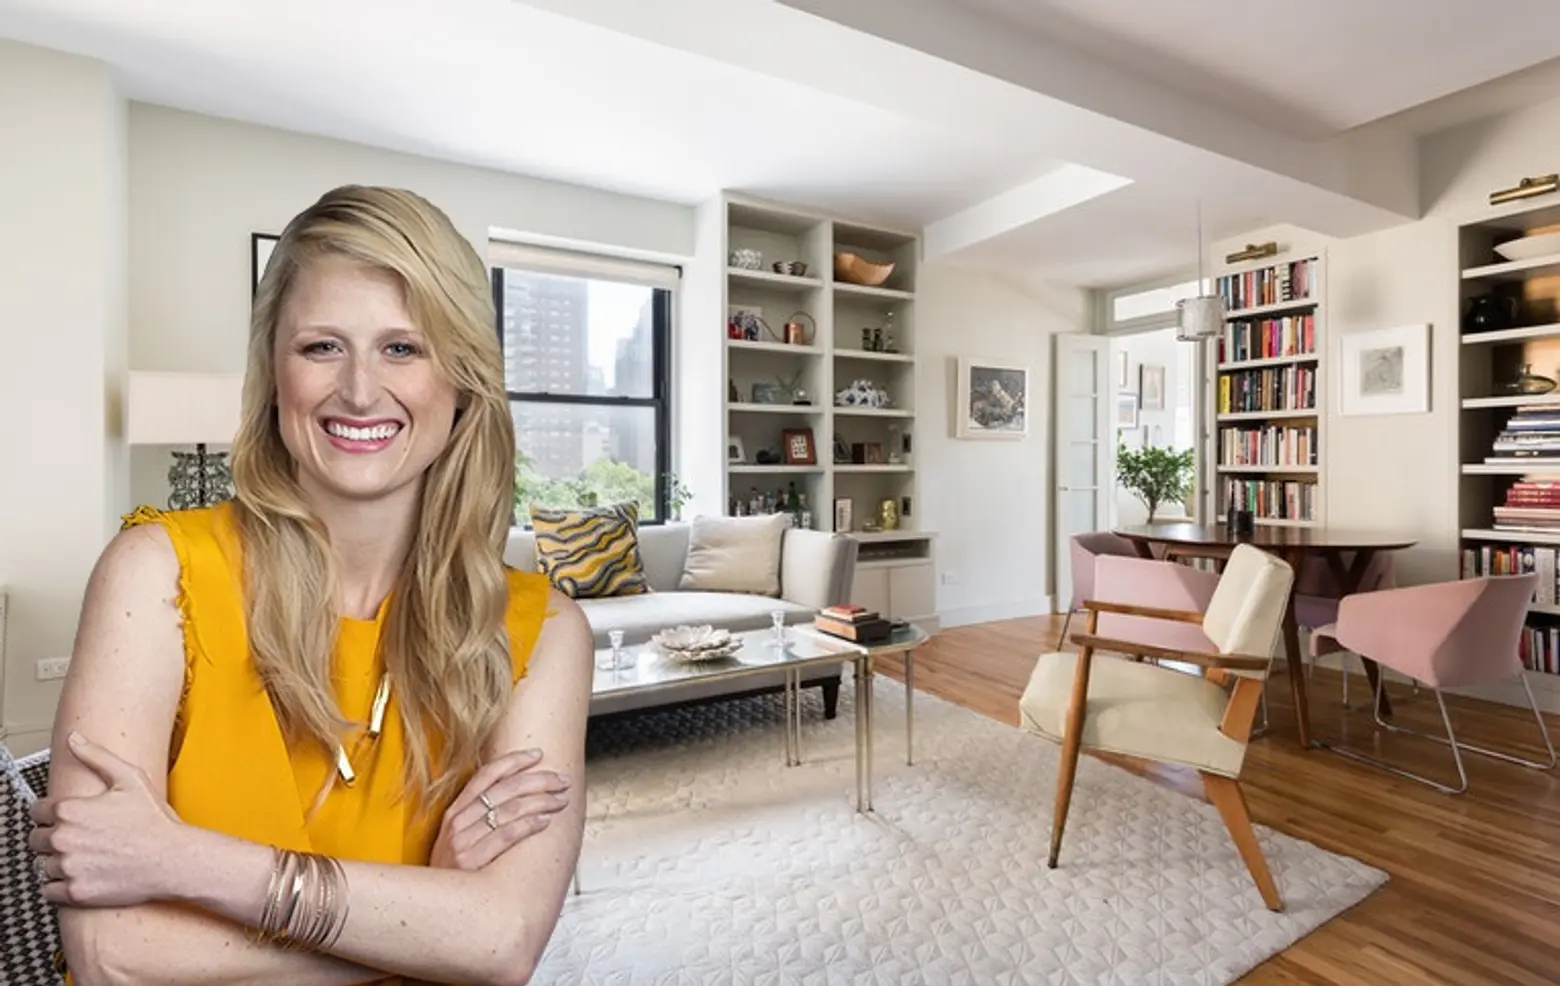 Meryl Streep’s daughter, actress Mamie Gummer, lists classy Chelsea apartment for $1.8M